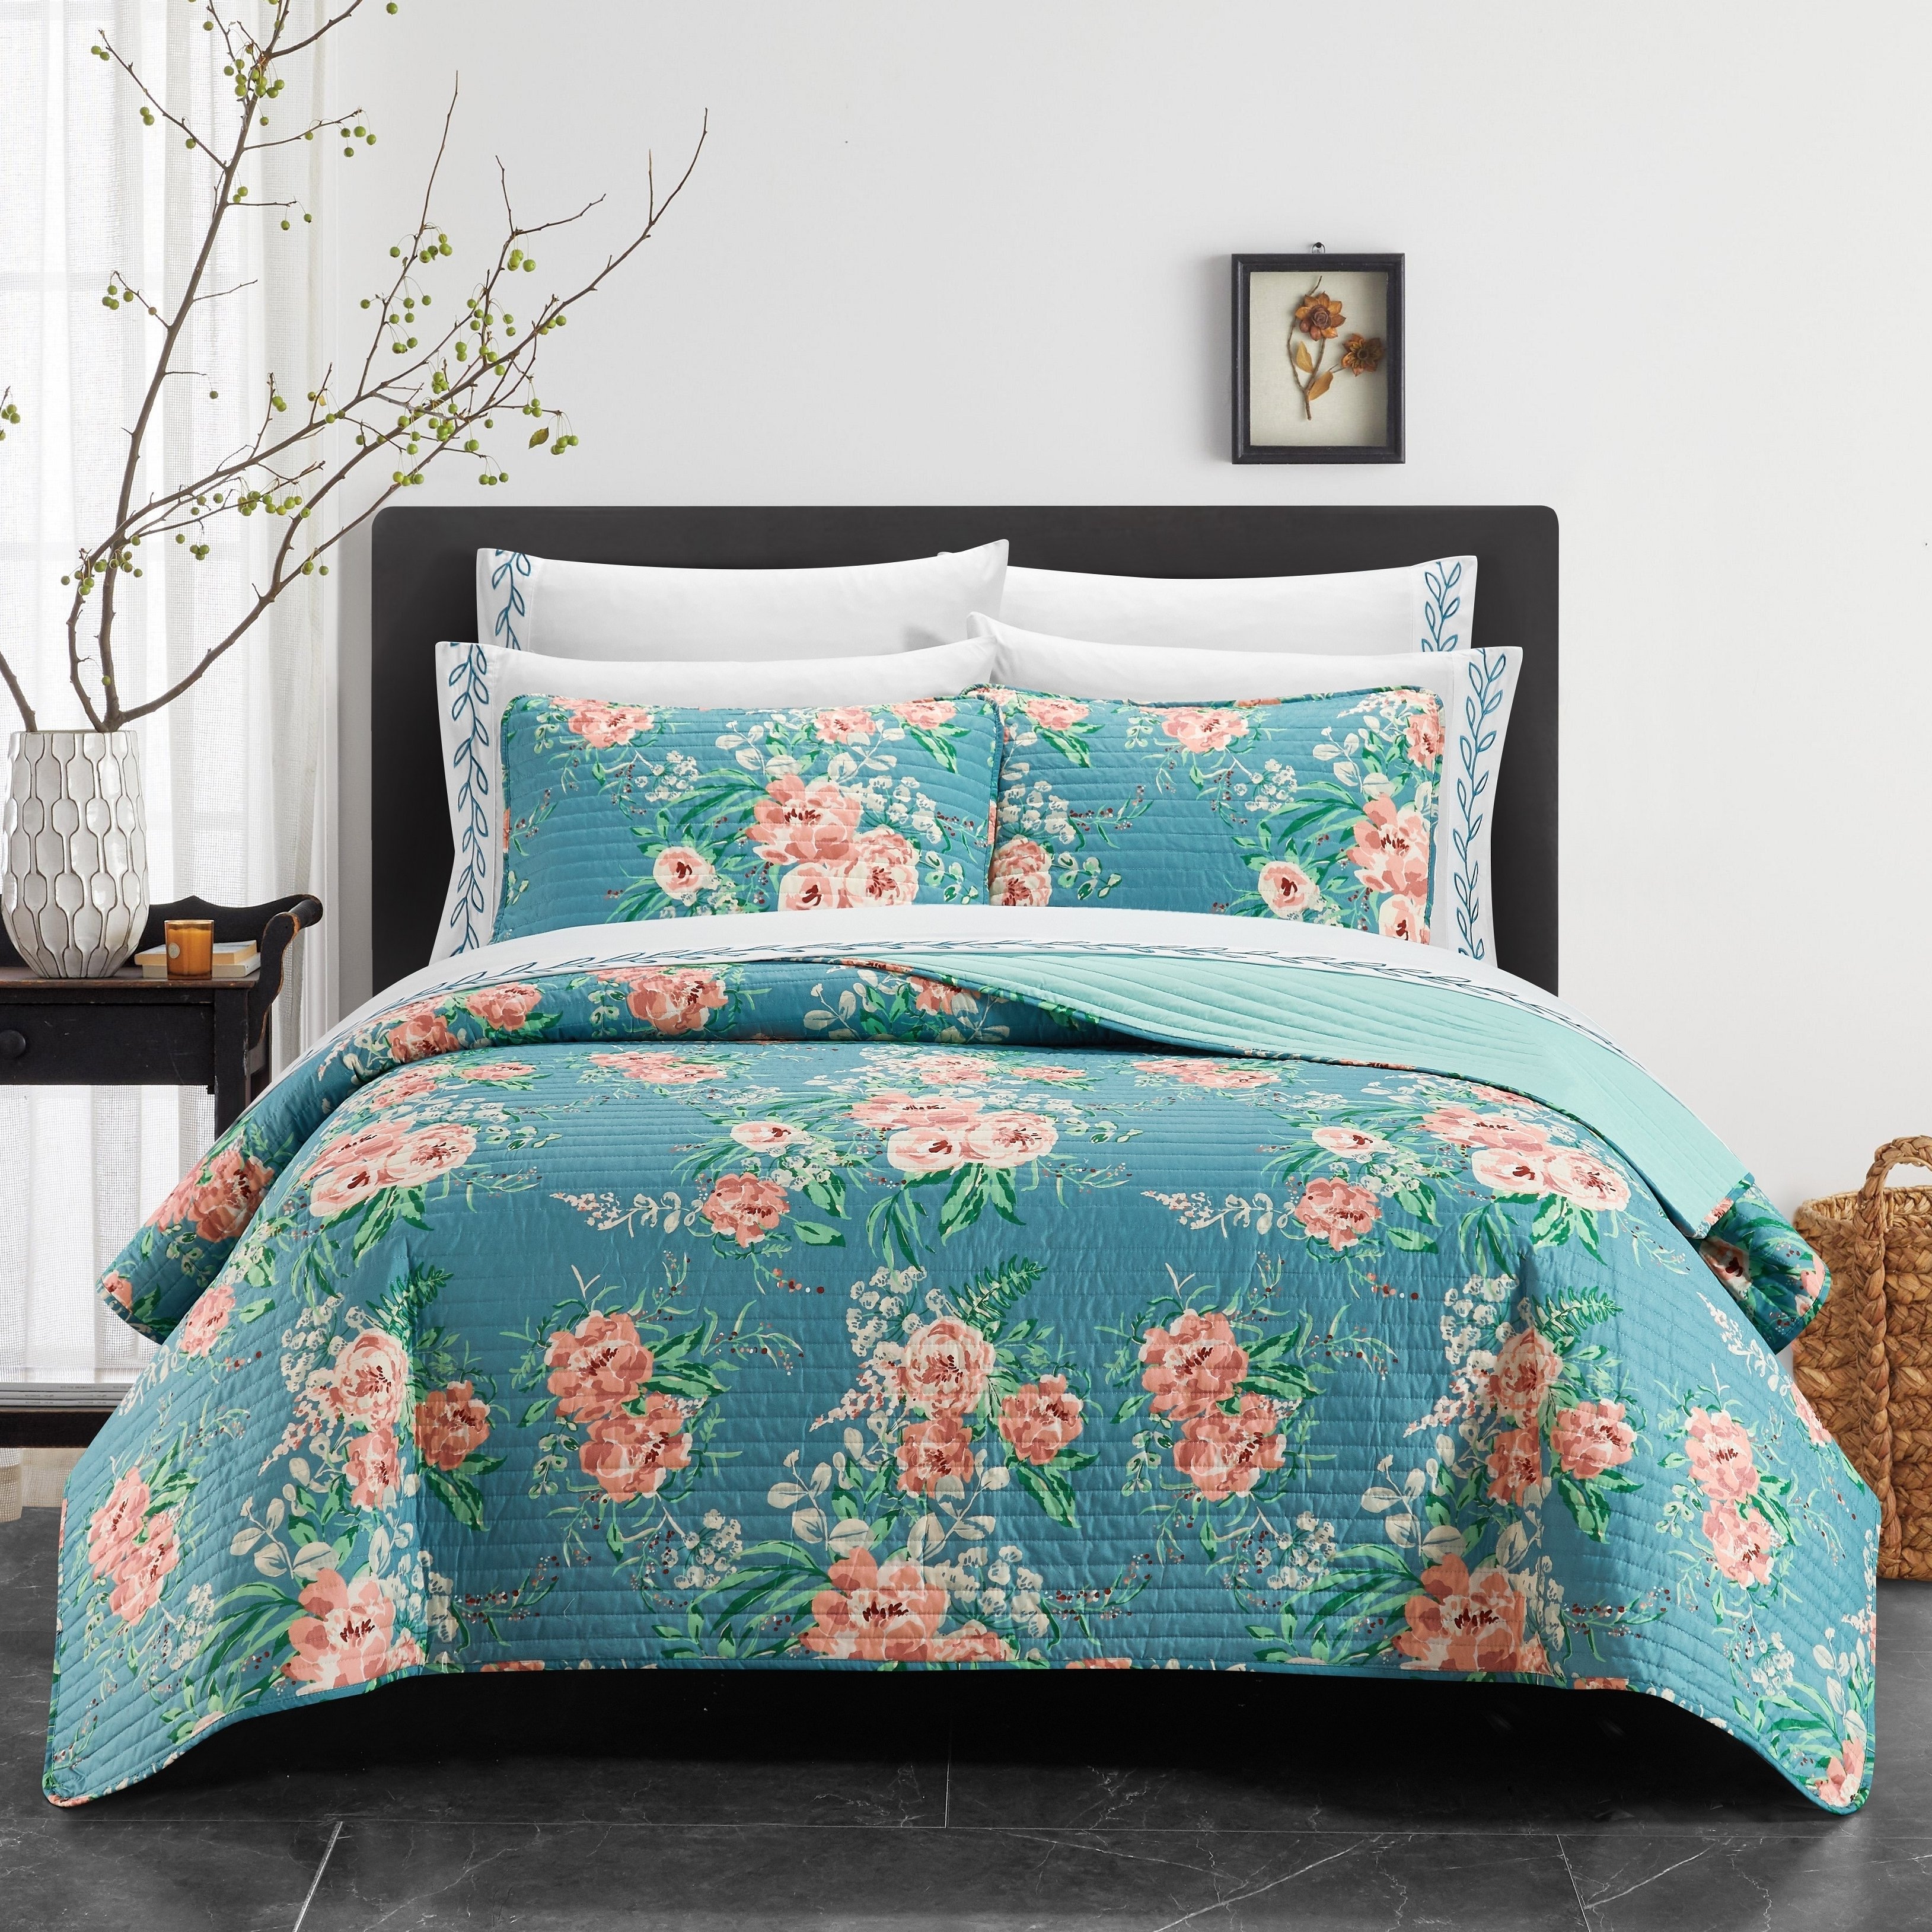 Palm Spring 9 Or 6 Piece Quilt Set Watercolor Floral Pattern Print Bed In A Bag - Aqua, King